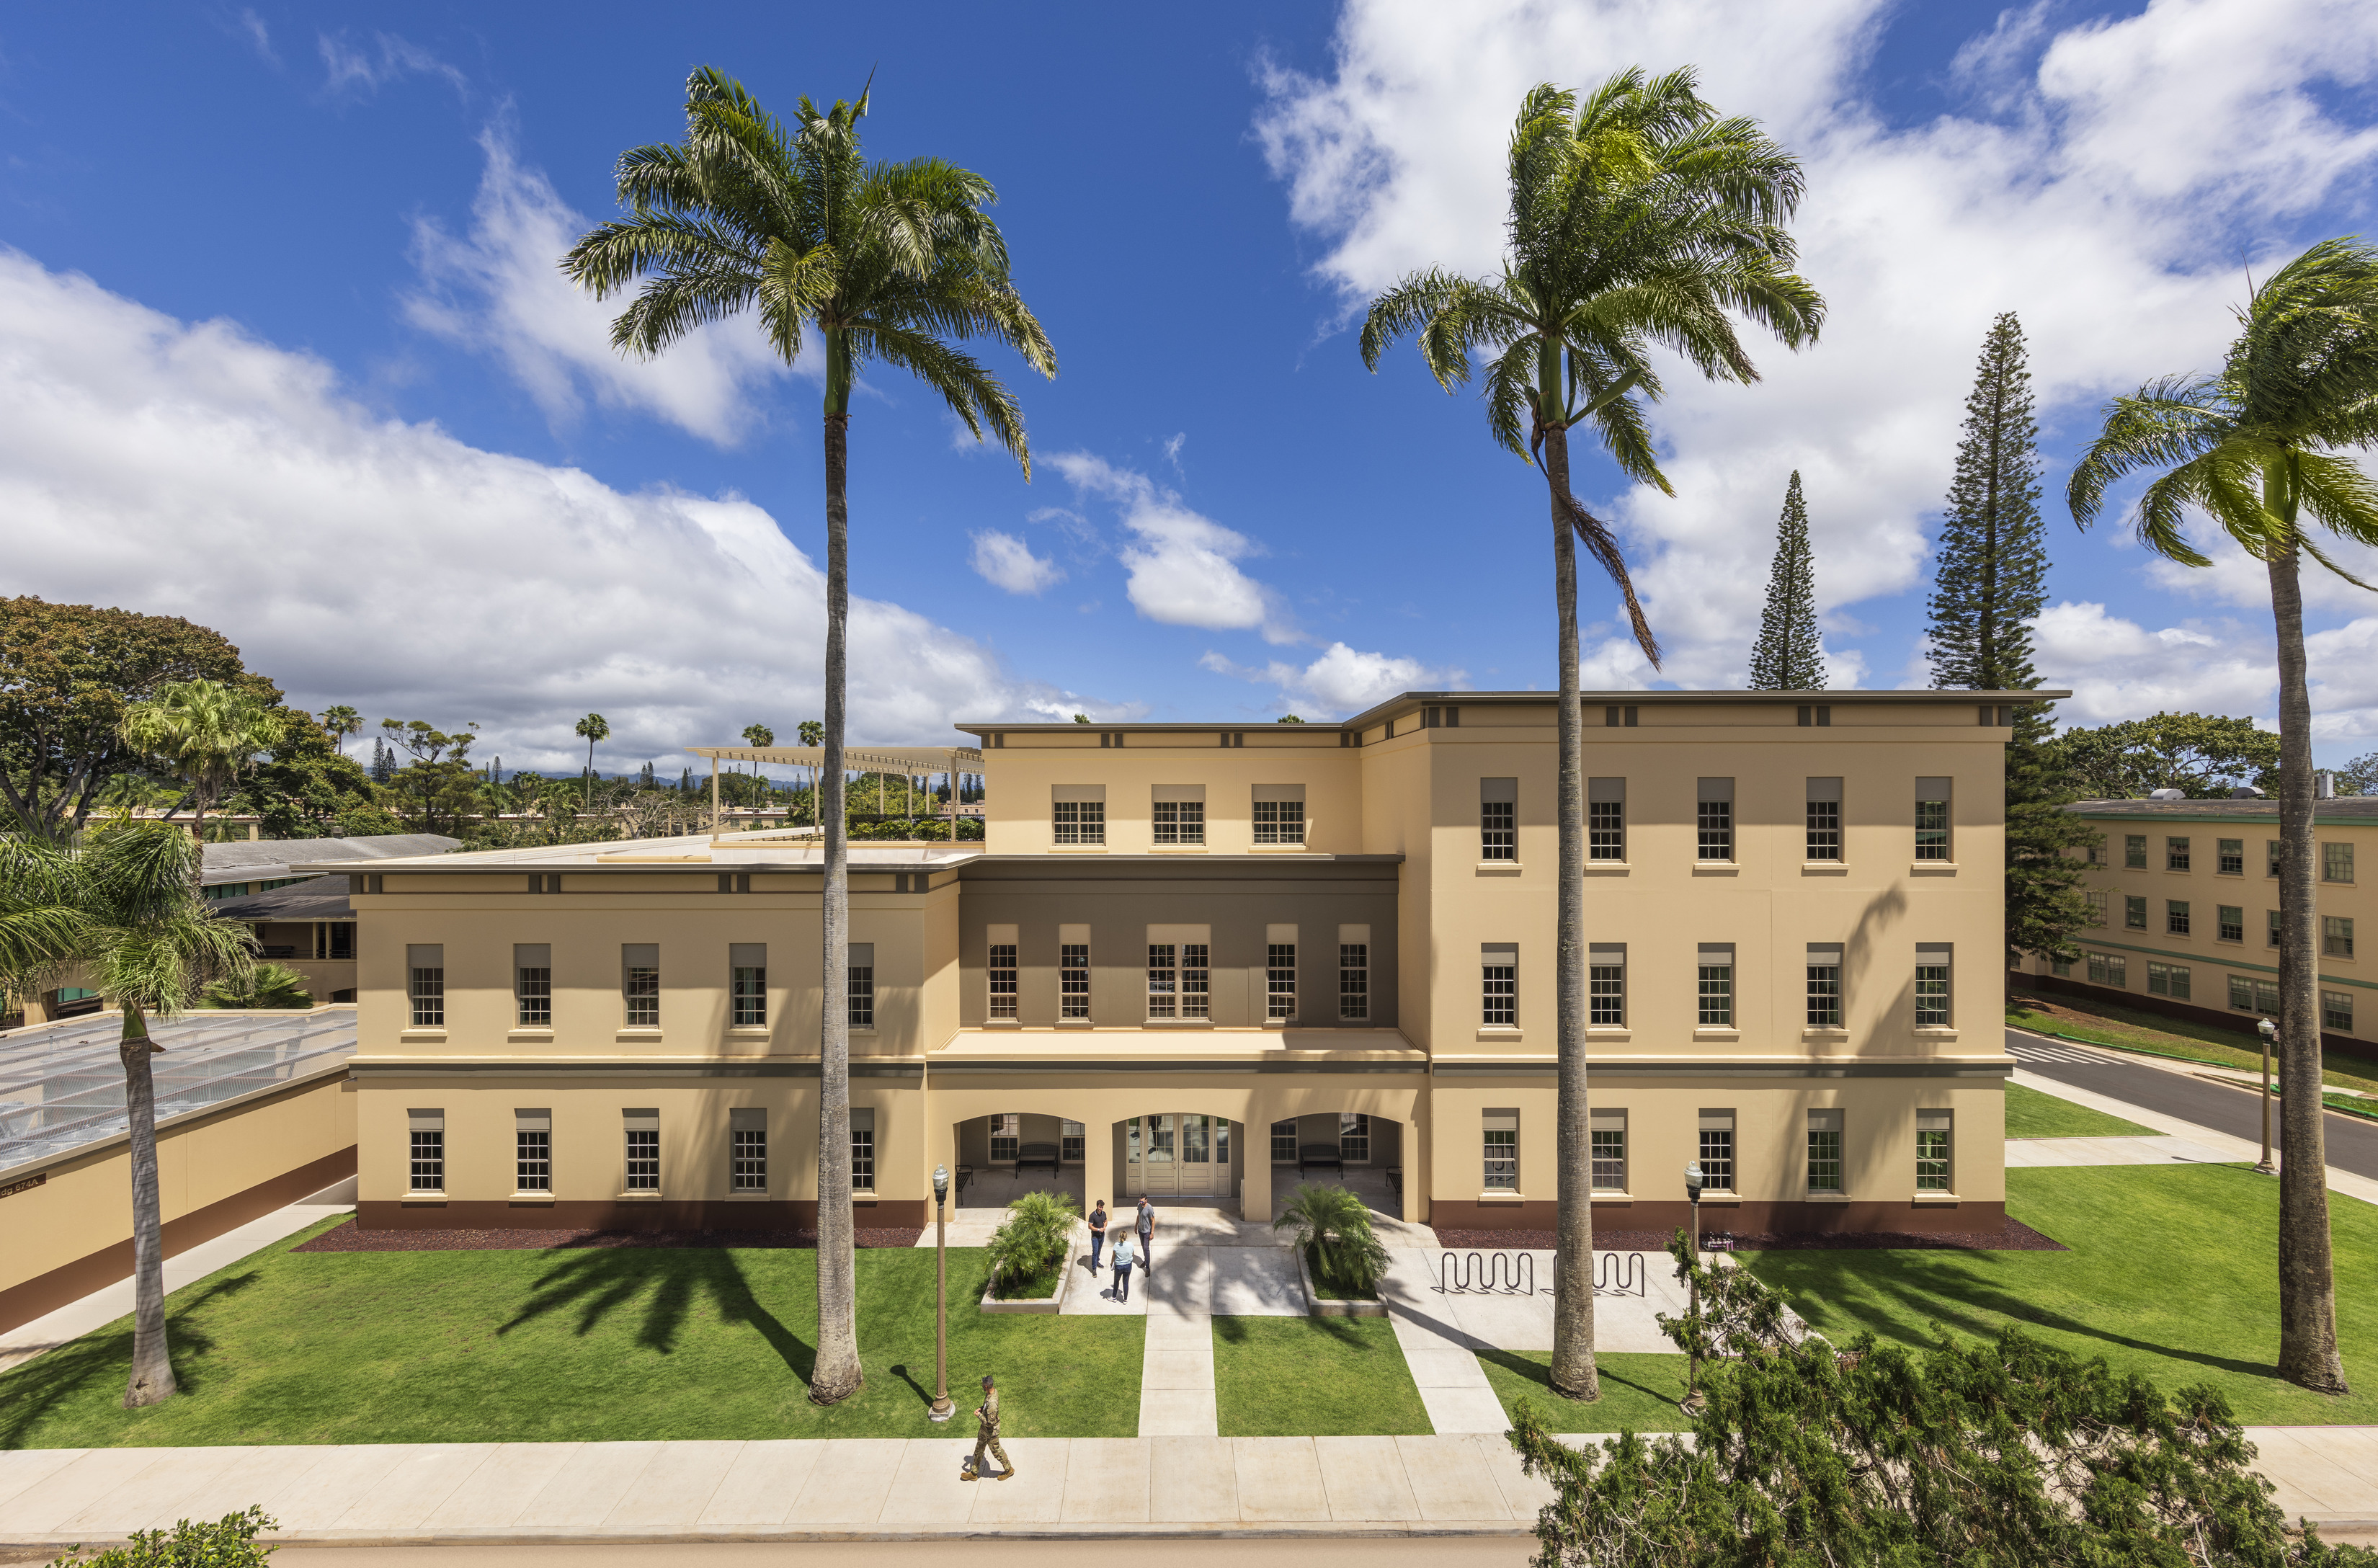 Desmond T. Doss Health Clinic at Schofield Barracks within Historic Medical Campus